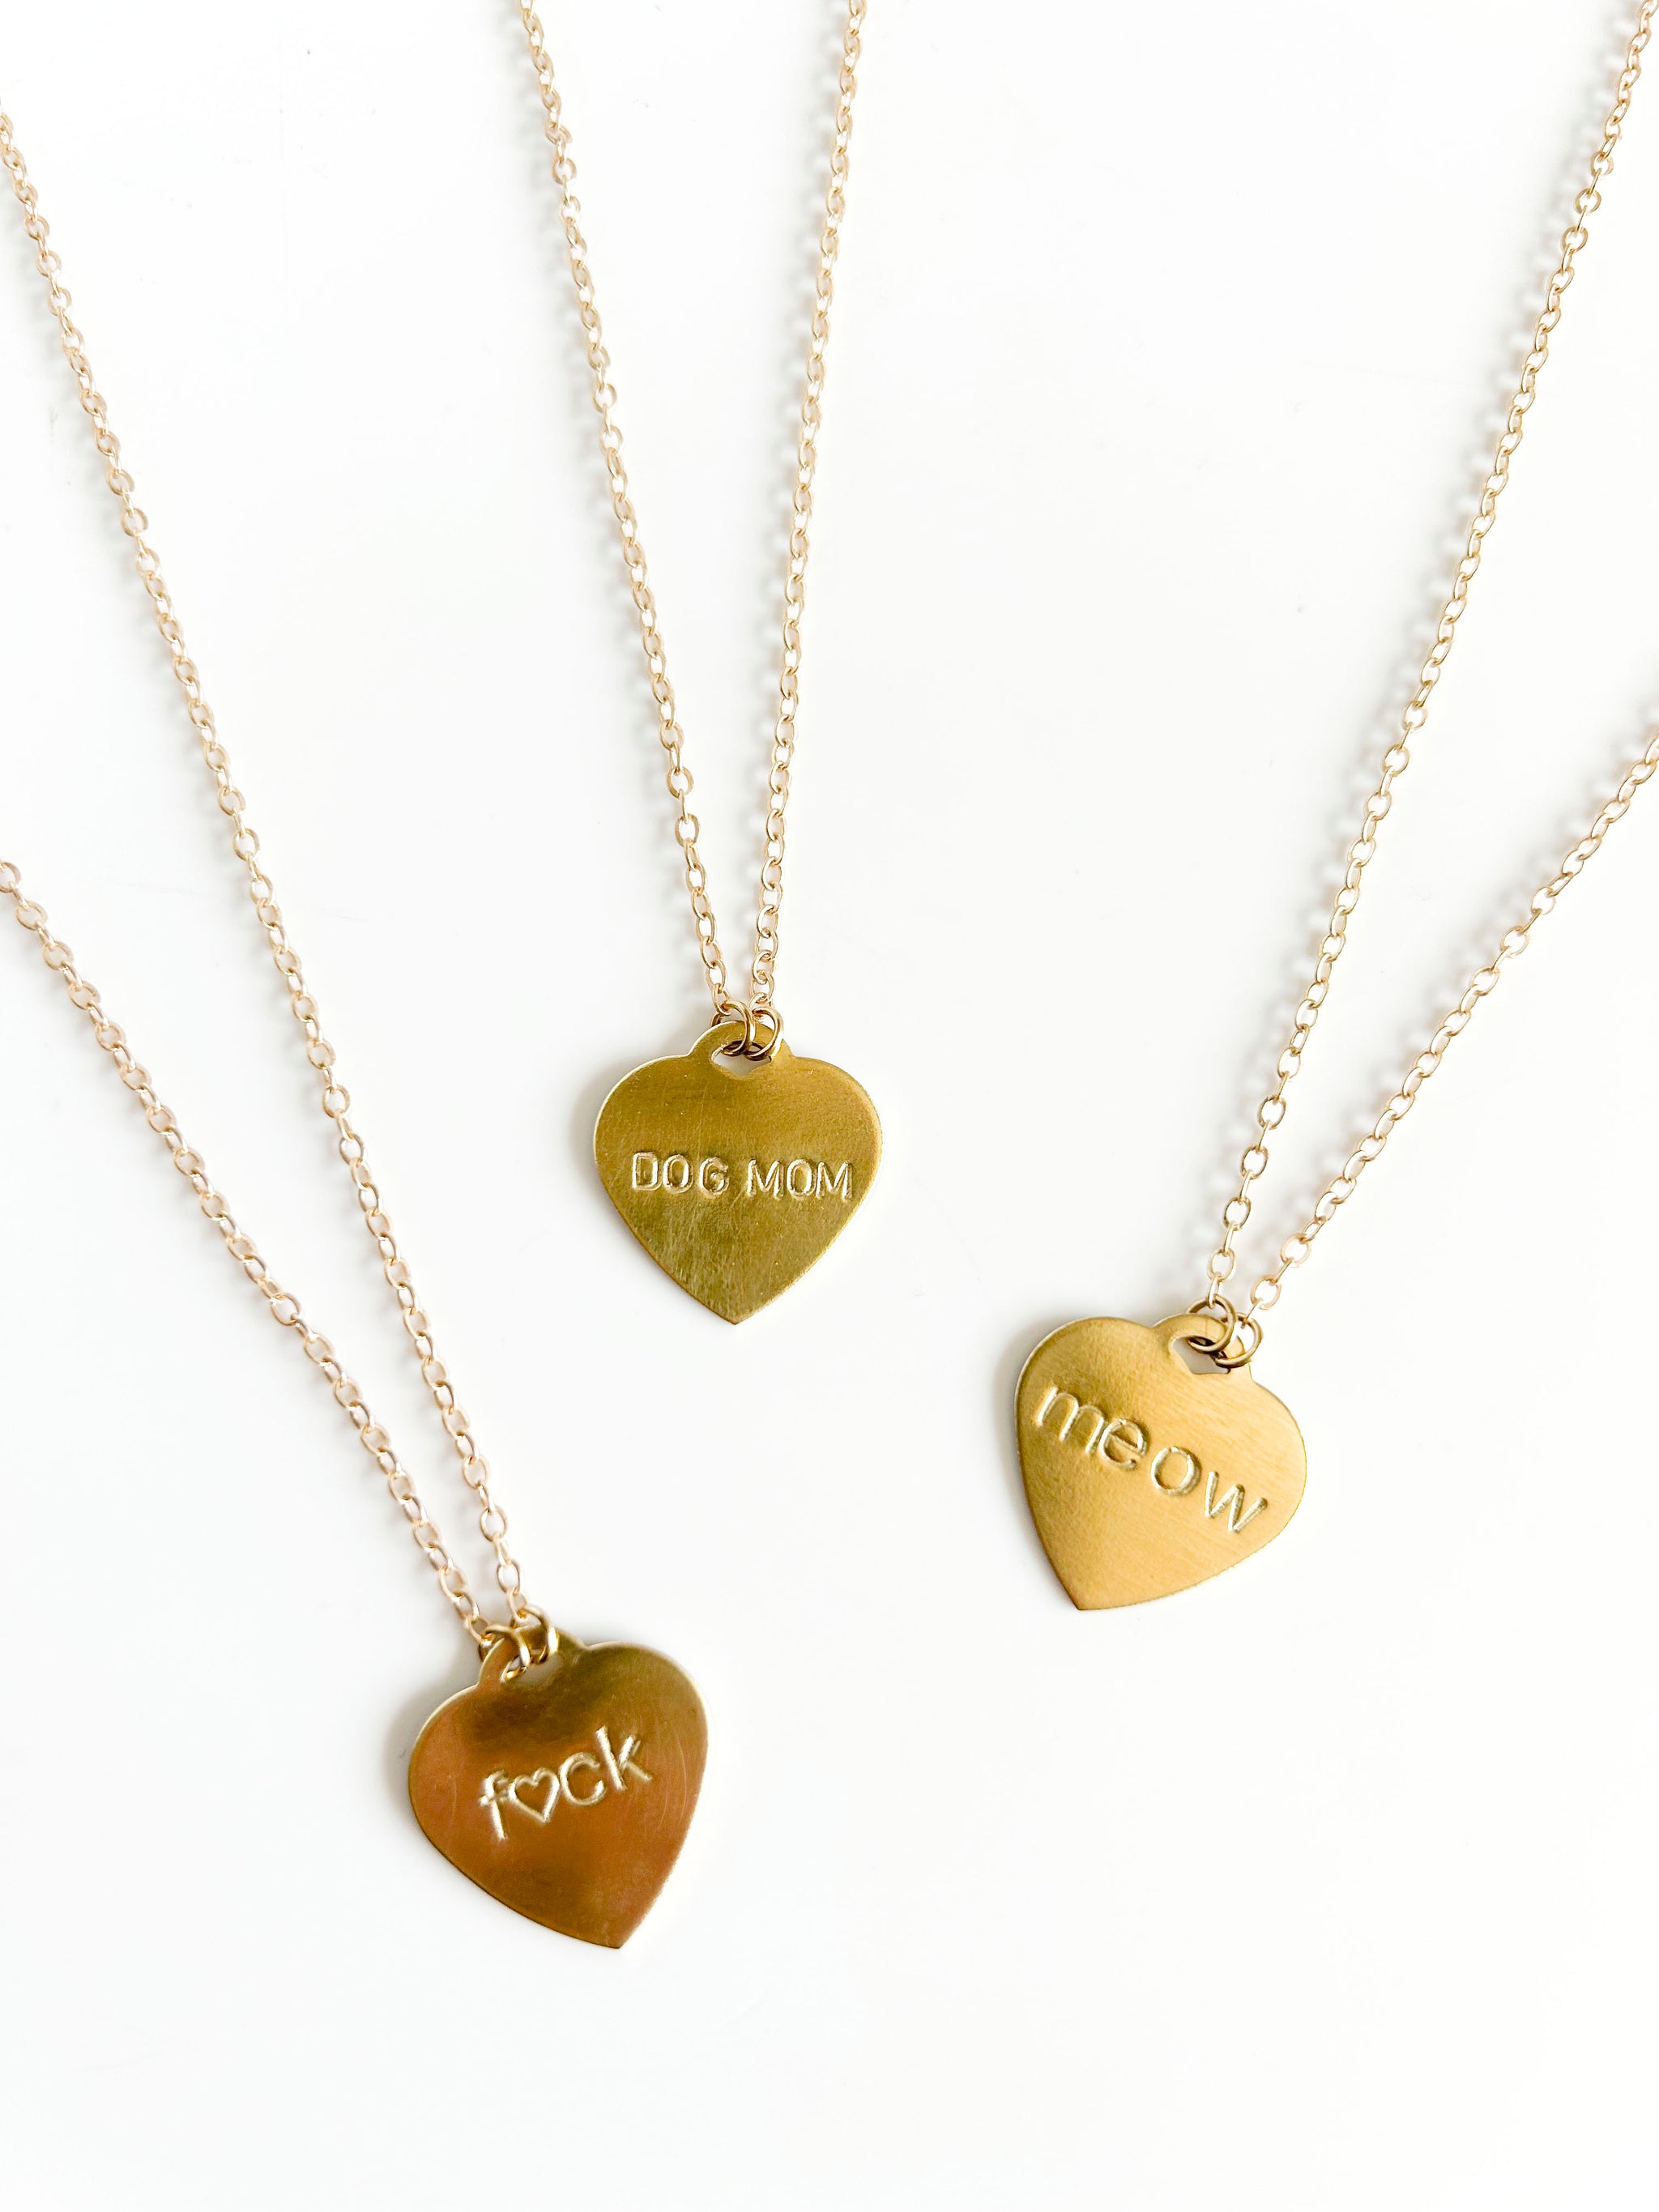 407 Hand-Stamped Brass Tags